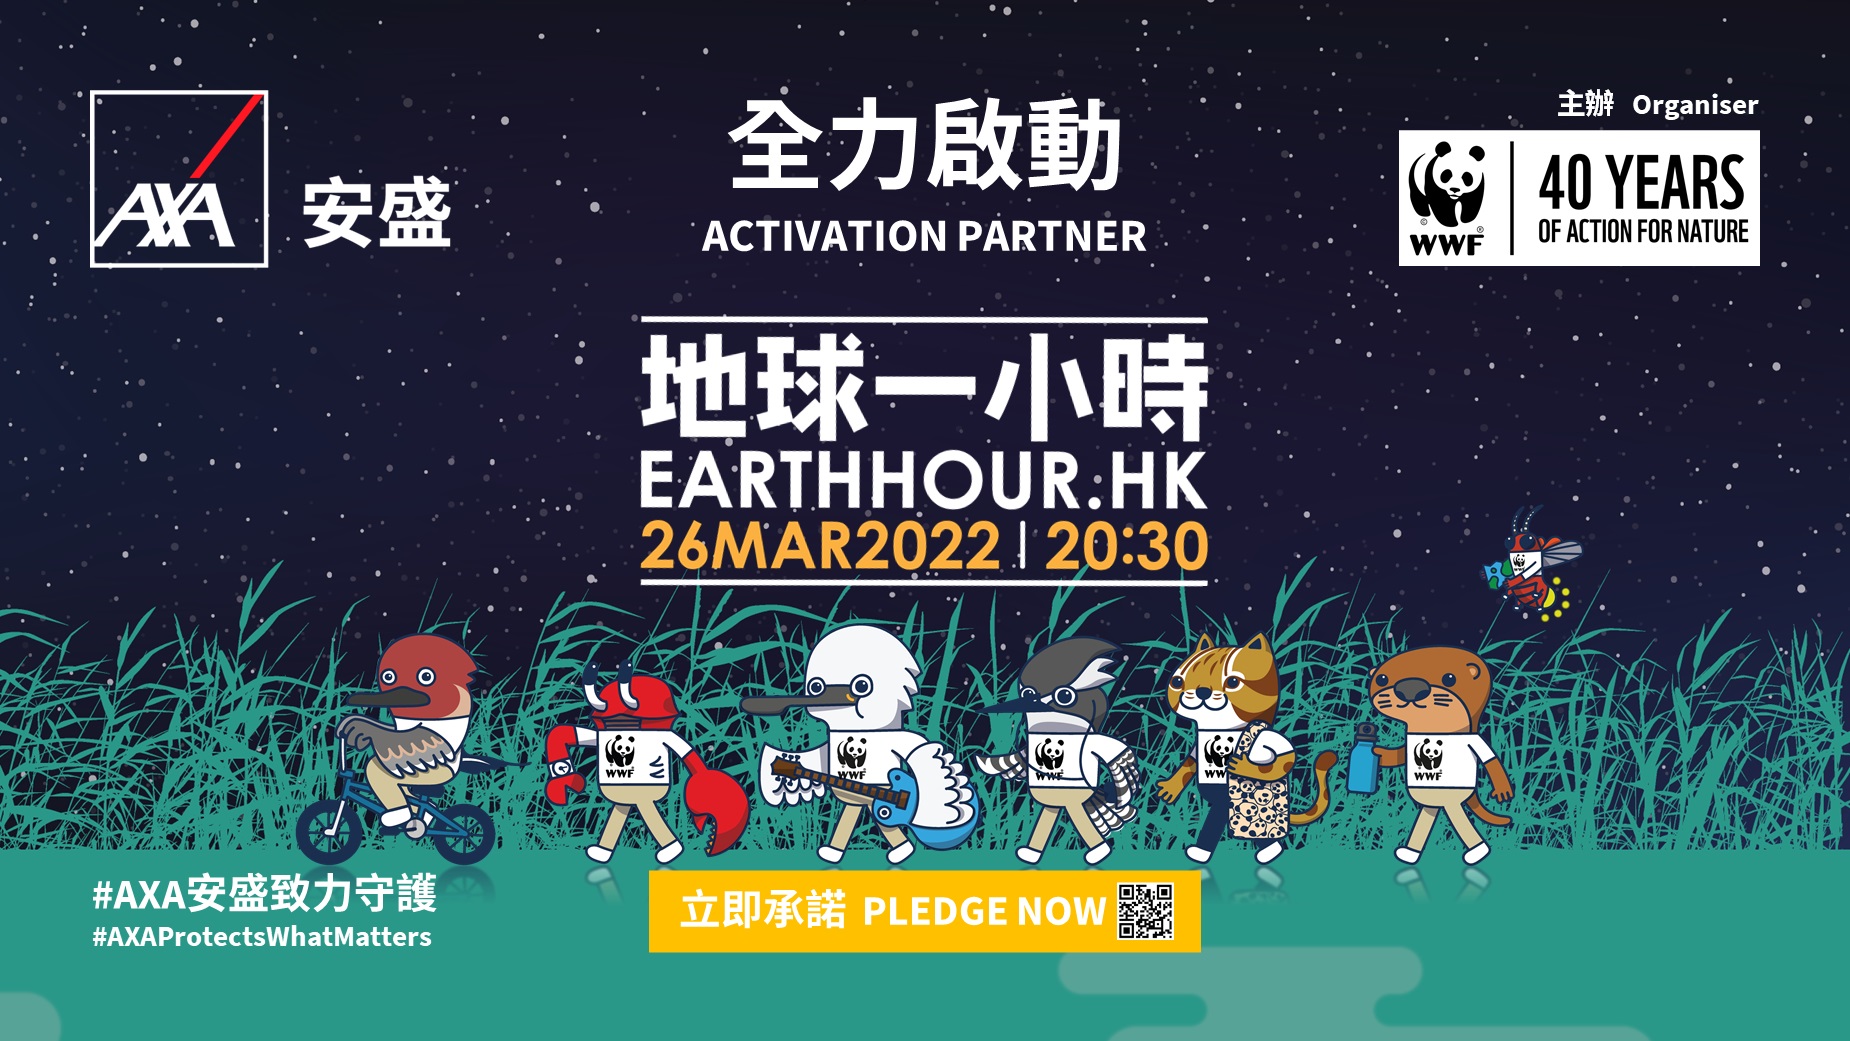 AXA becomes Activation Partner of WWF Earth Hour 2022